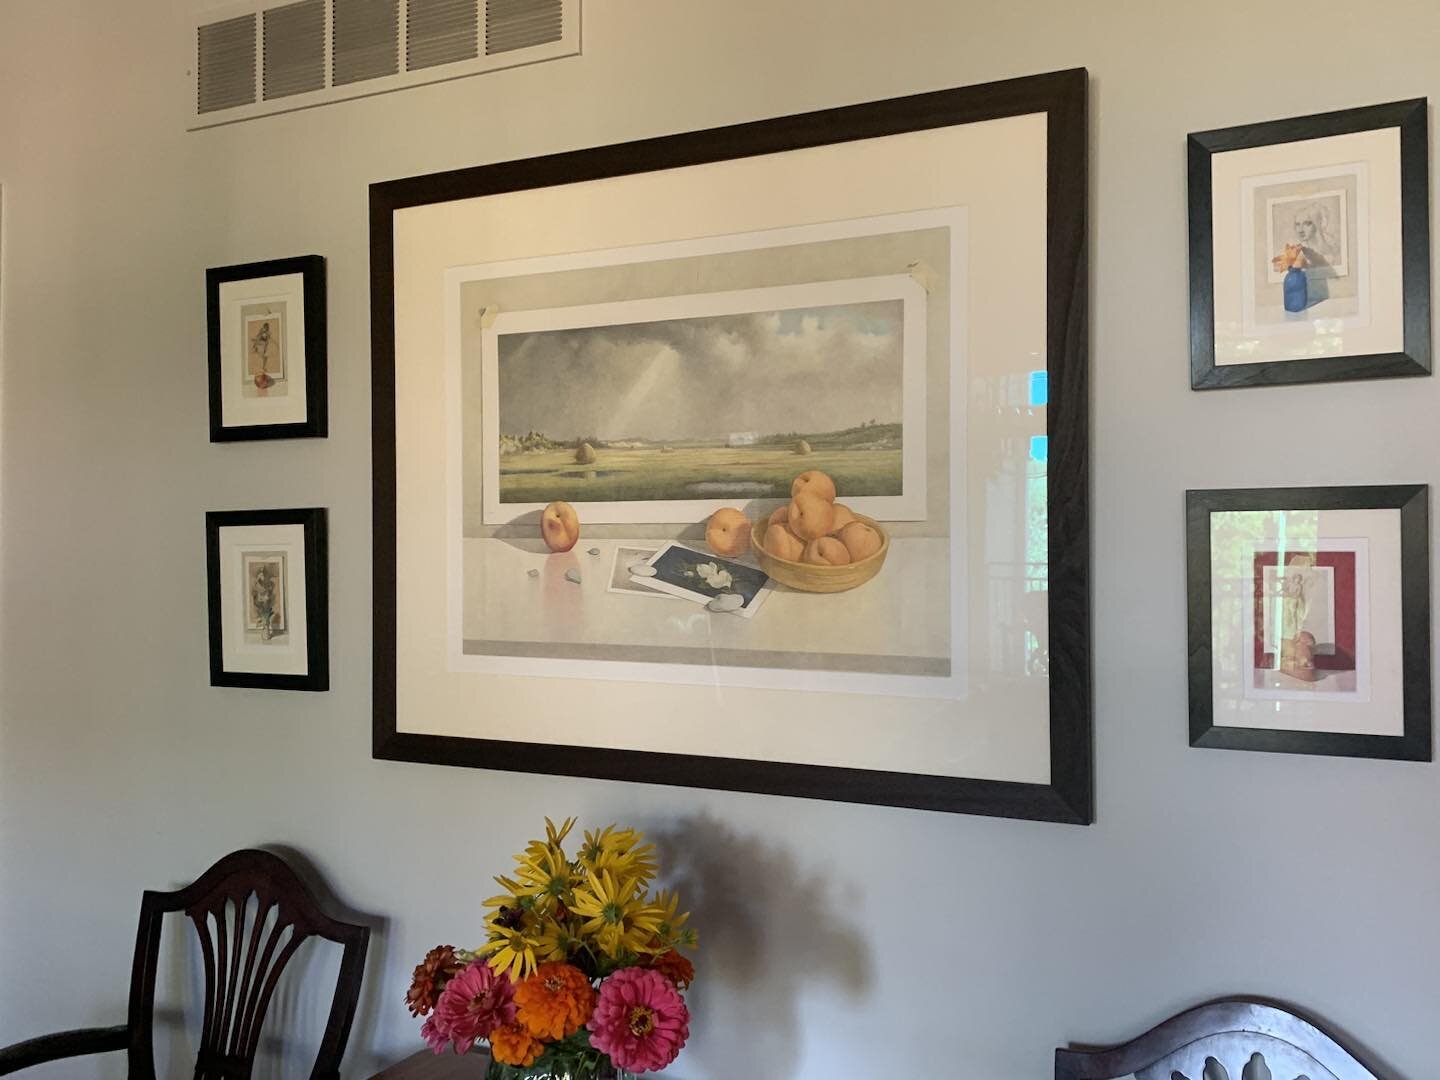 So nice to see a group of my drawings in the home of a St Louis collector. Thank you Isabel!